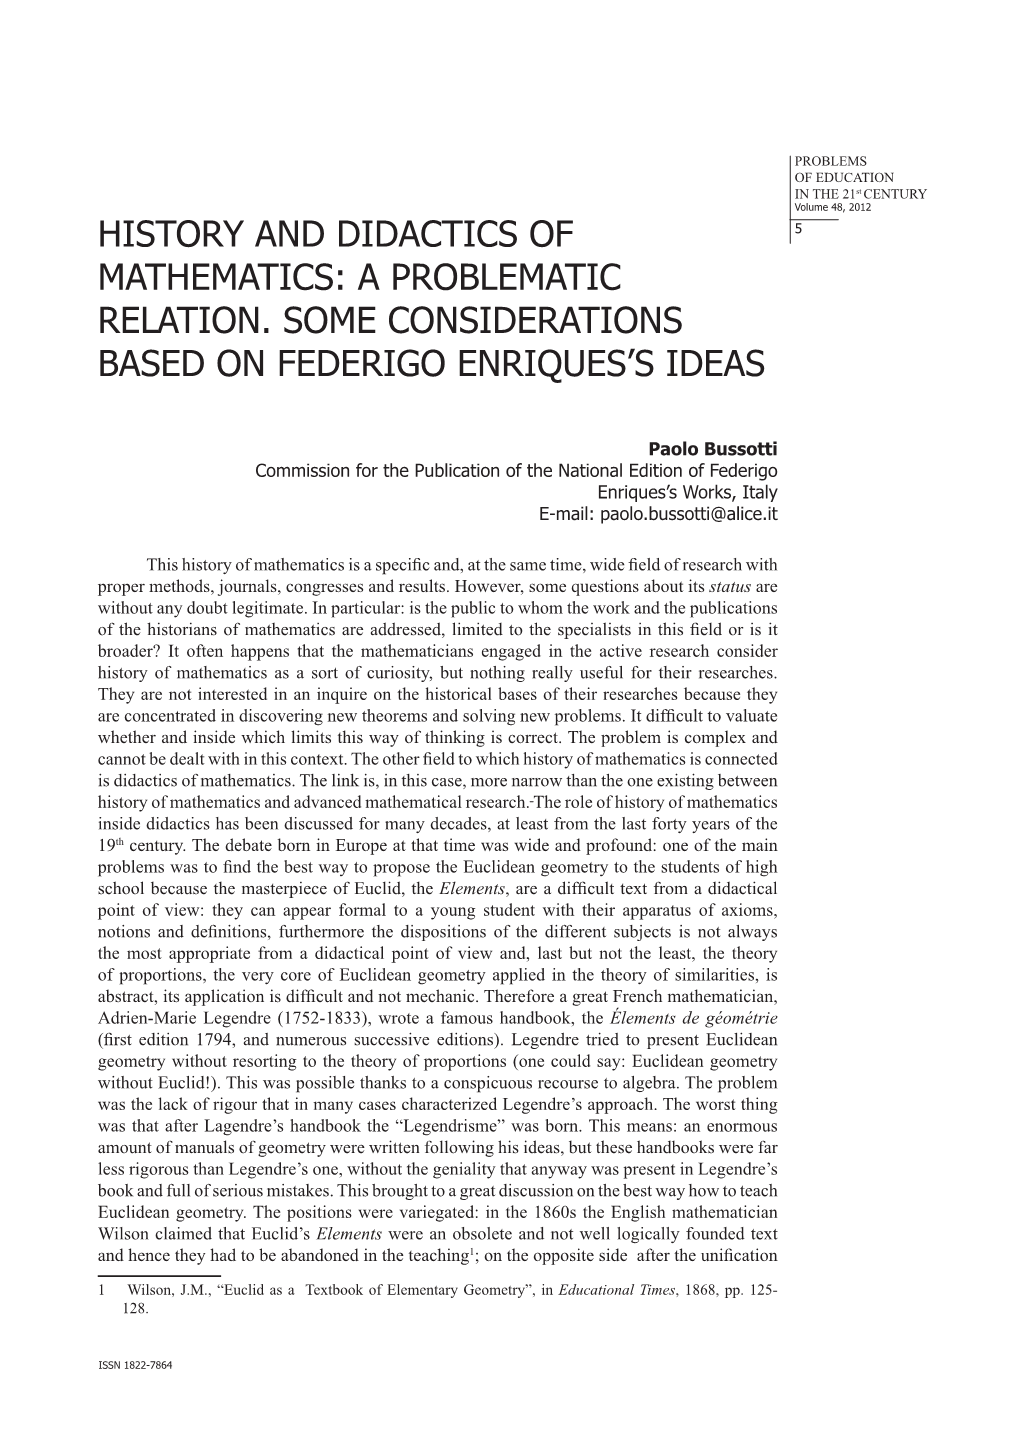 History and Didactics of Mathematics: a Problematic Relation